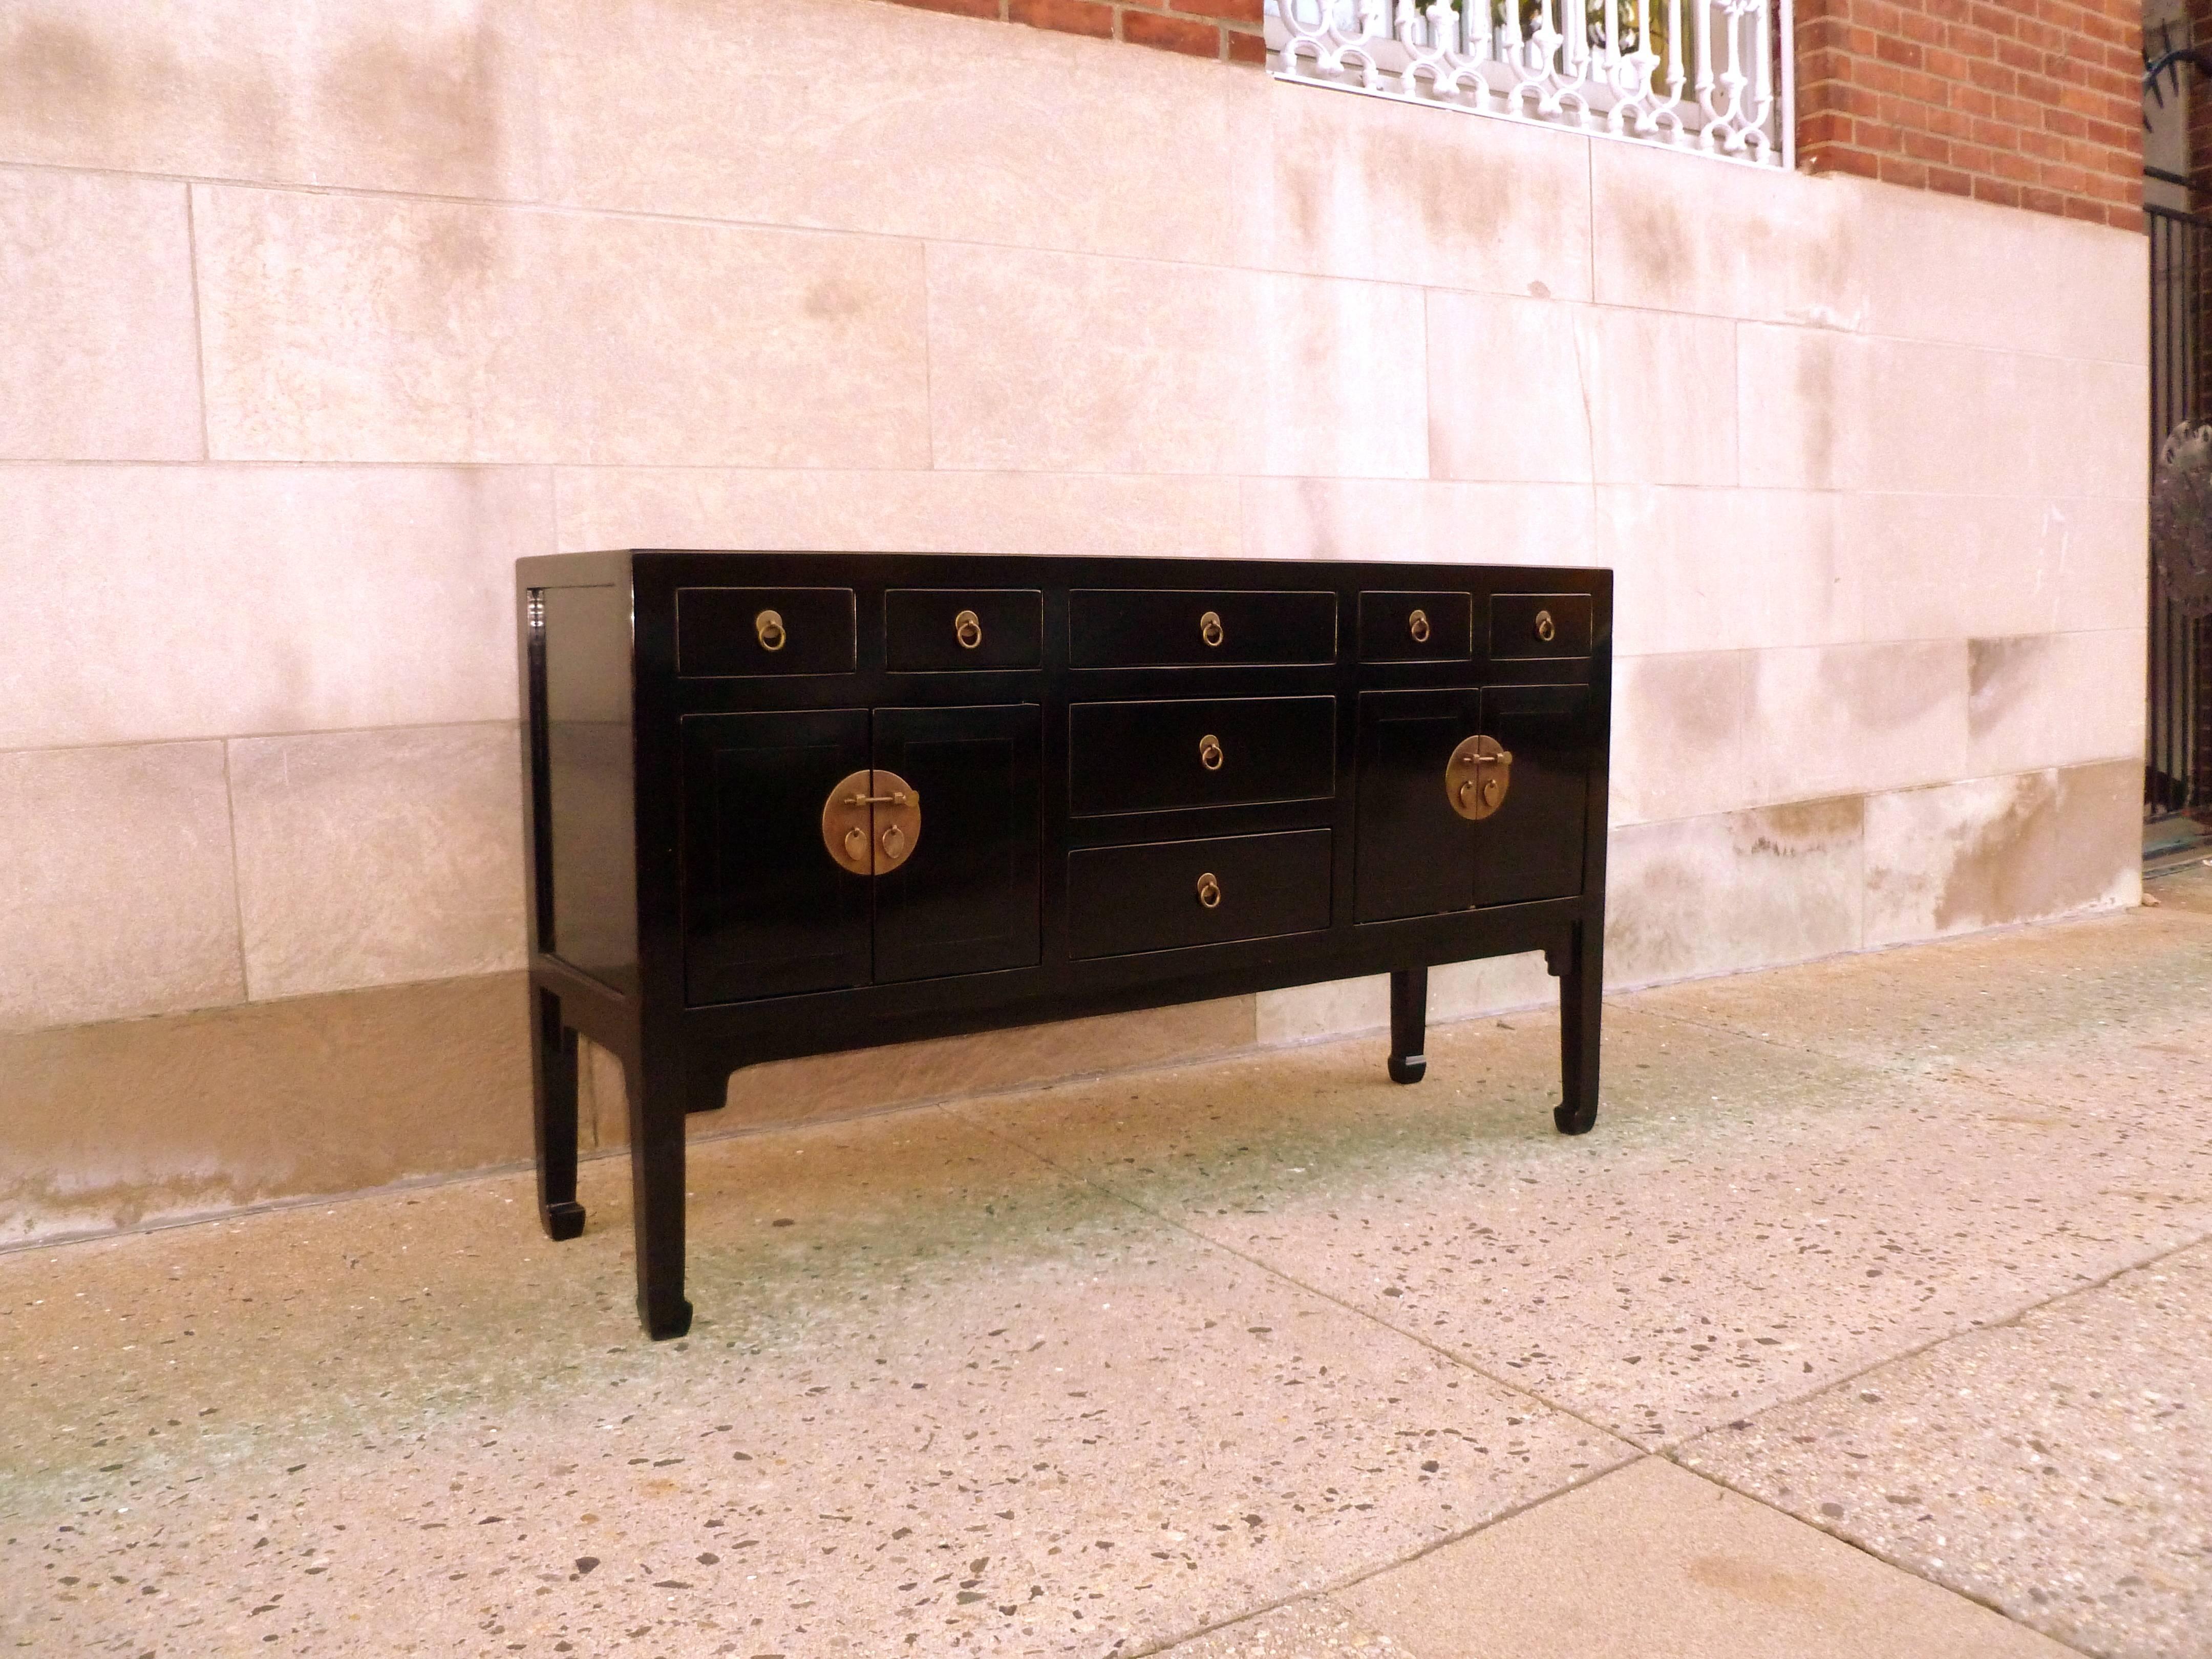 Early 20th Century Fine Black Lacquer Sideboard with Drawers and Doors